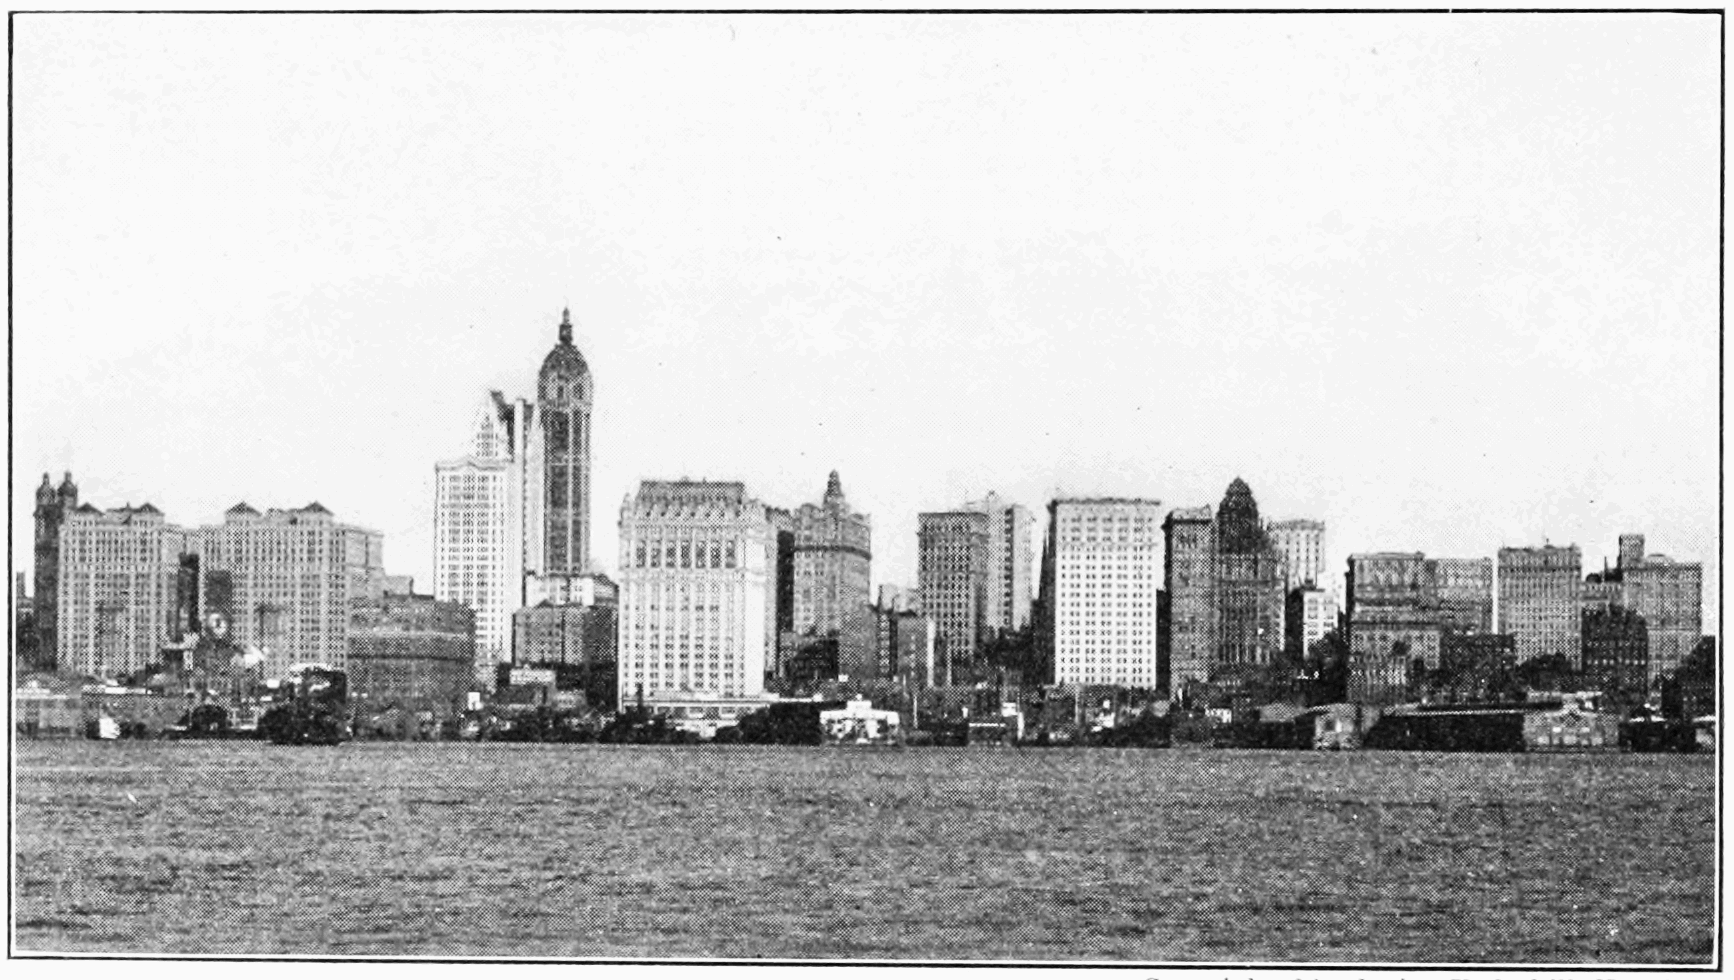 Black and white photo of New York City Skyline taken from Hudson river in 1909. Met Life building sticking up above the rest